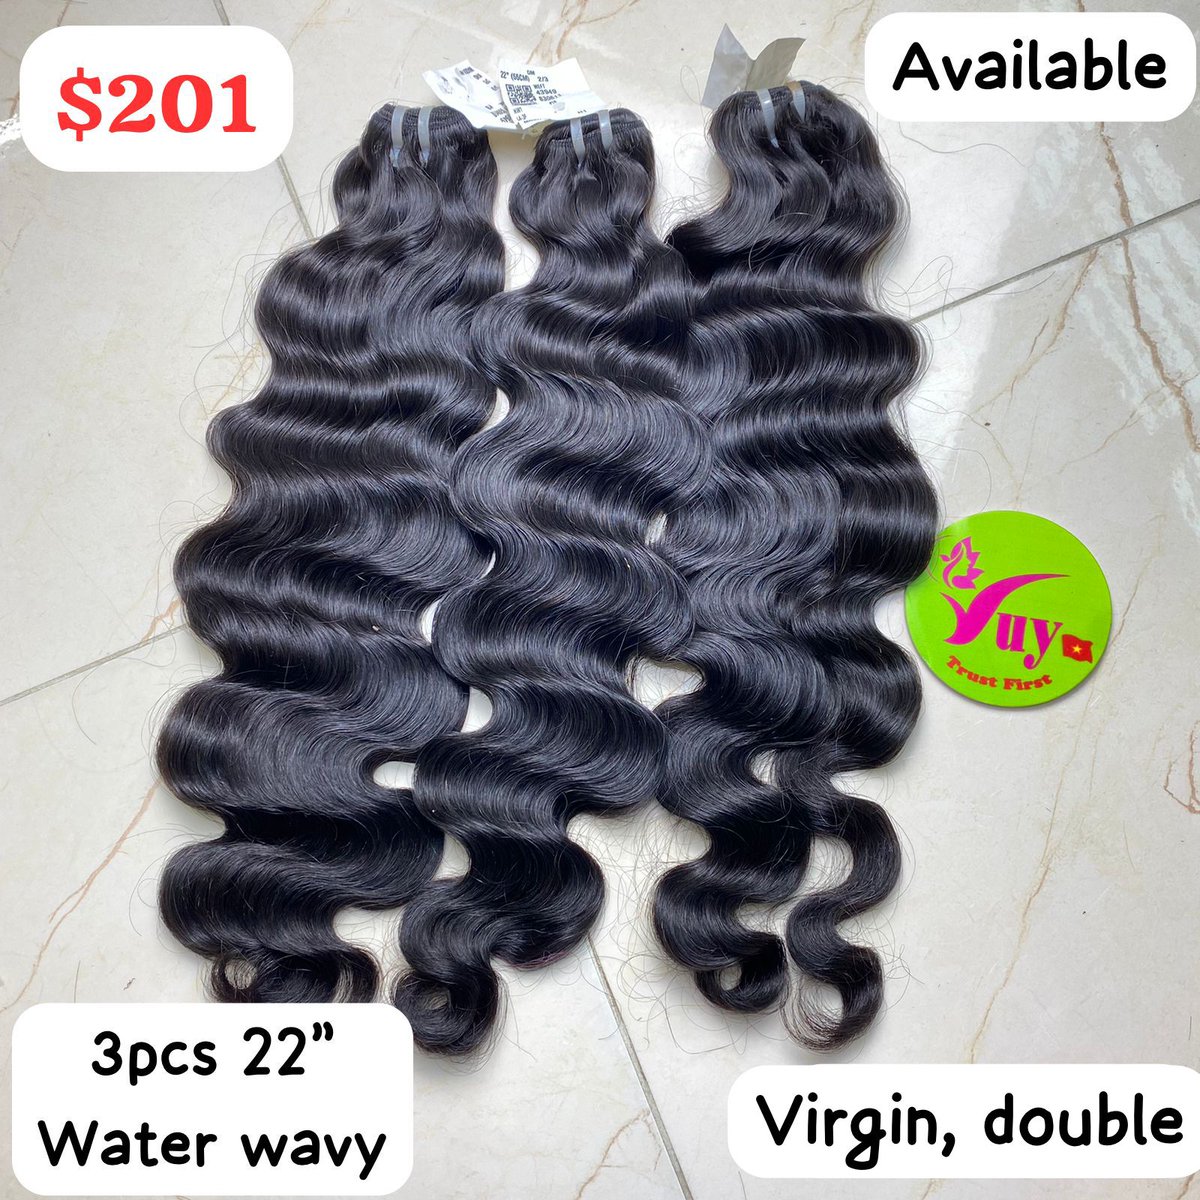 22” Water Wavy From Virgin Hair 😍 Contact with me on whatsapp +84396092128 #wholesale hair #wholesalehairvendors #wholesalehairsupplier #vuyvietnam #wholesalehairextension #hairsupplier #hairsupplierinvietnam #rawhair #rawhairvendor #hairfactory #hairfactoryinvietnam